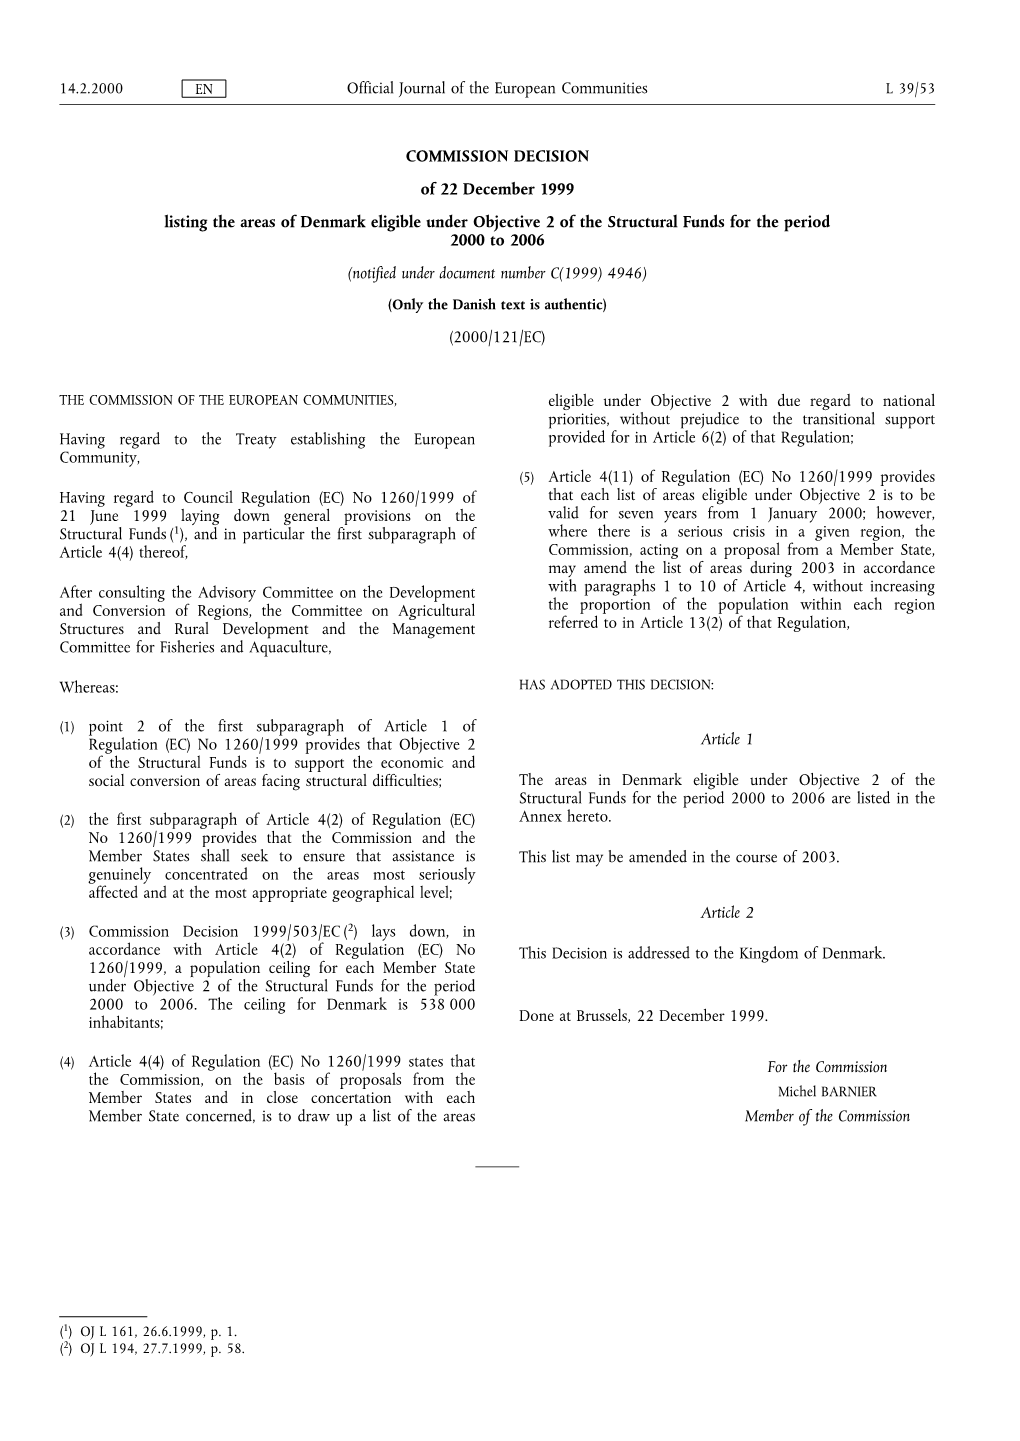 COMMISSION DECISION of 22 December 1999 Listing the Areas Of